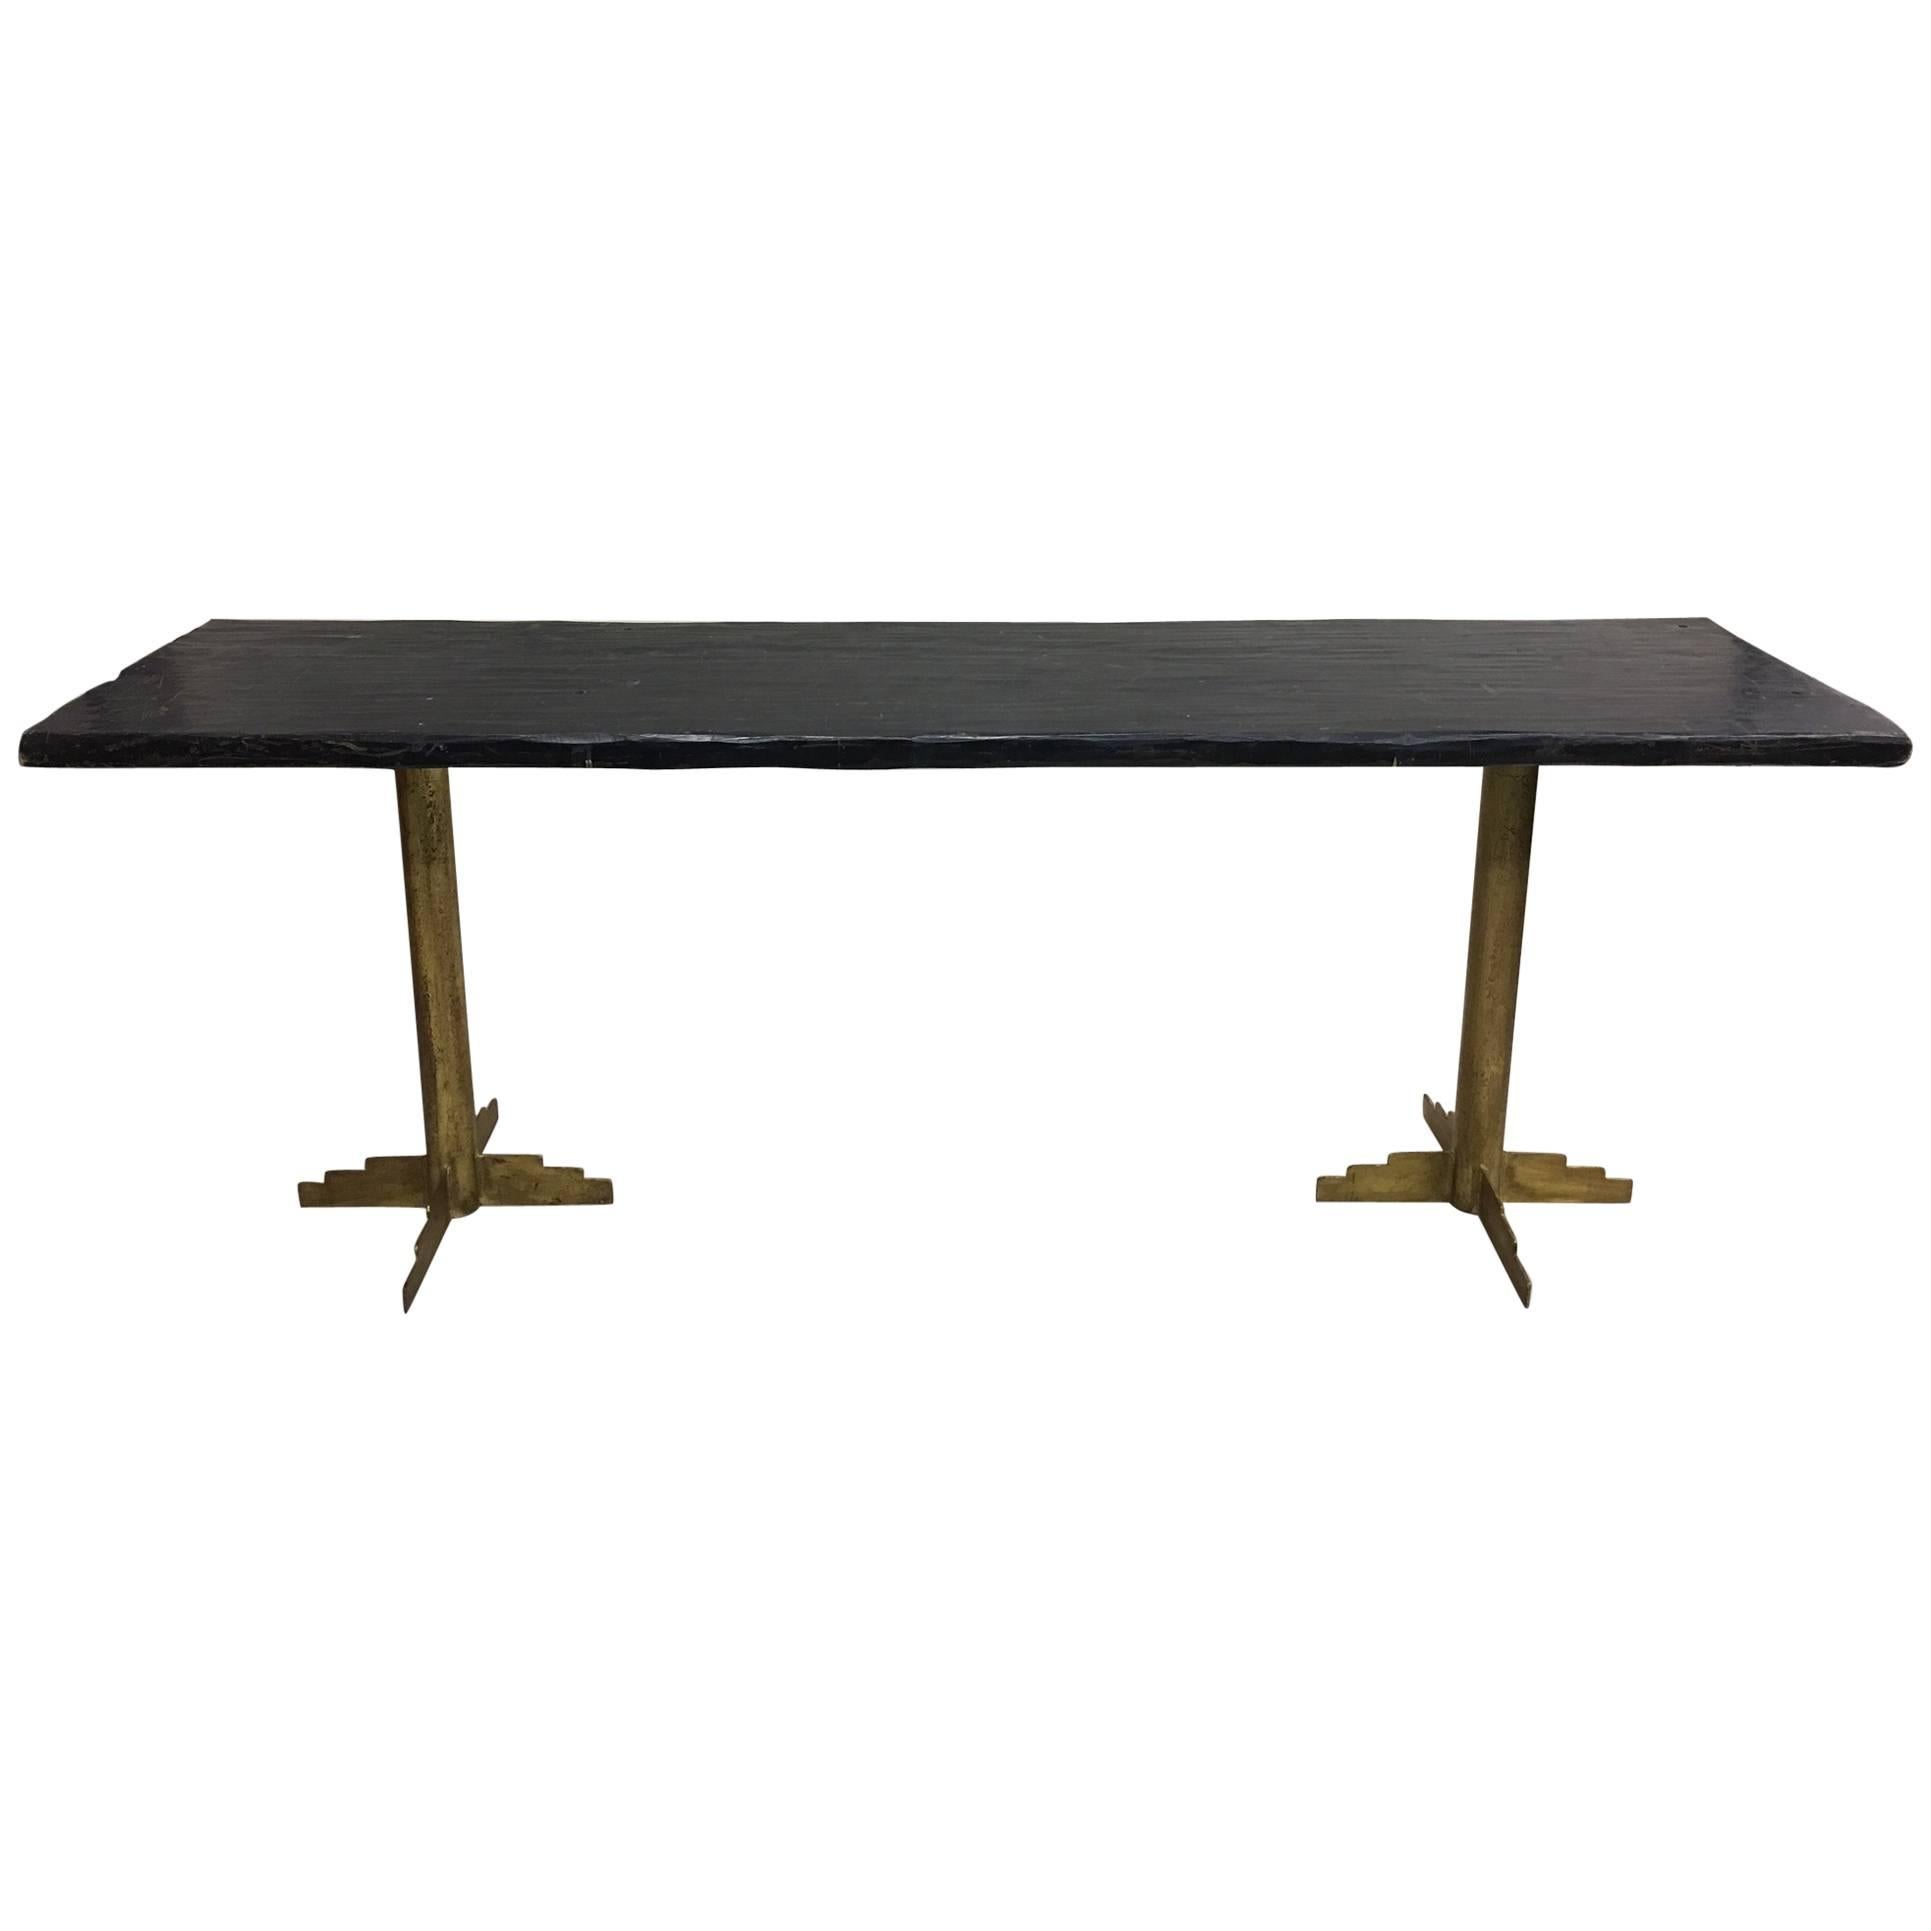 Two French Mid-Century Modern Gilt Iron Consoles or Dining Tables, 1925 For Sale